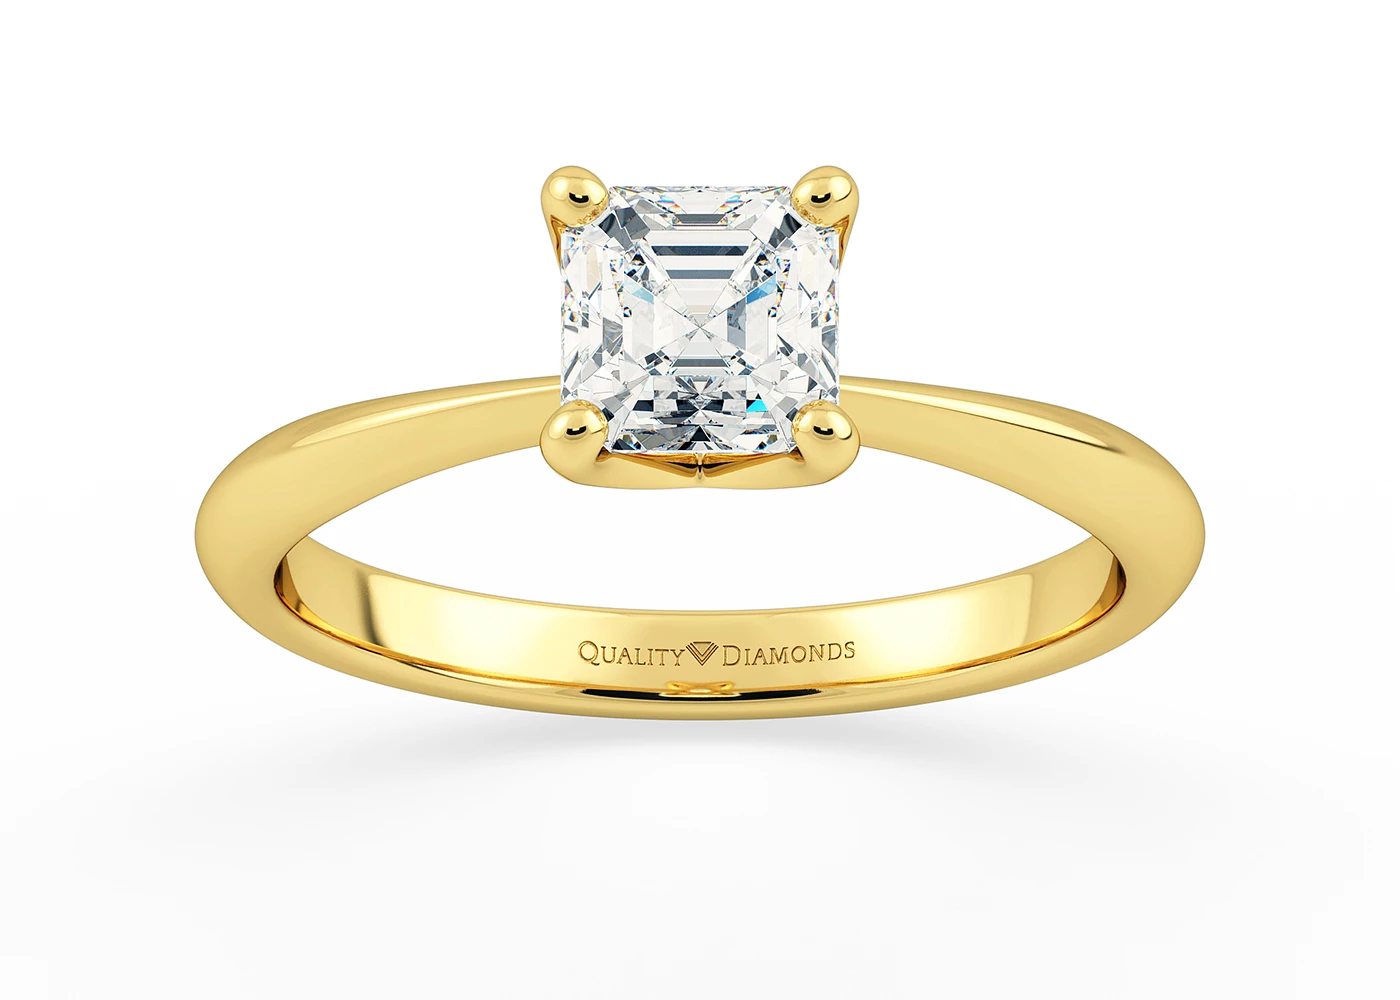 One Carat Asscher Solitaire Diamond Engagement Ring in 18K Yellow Gold